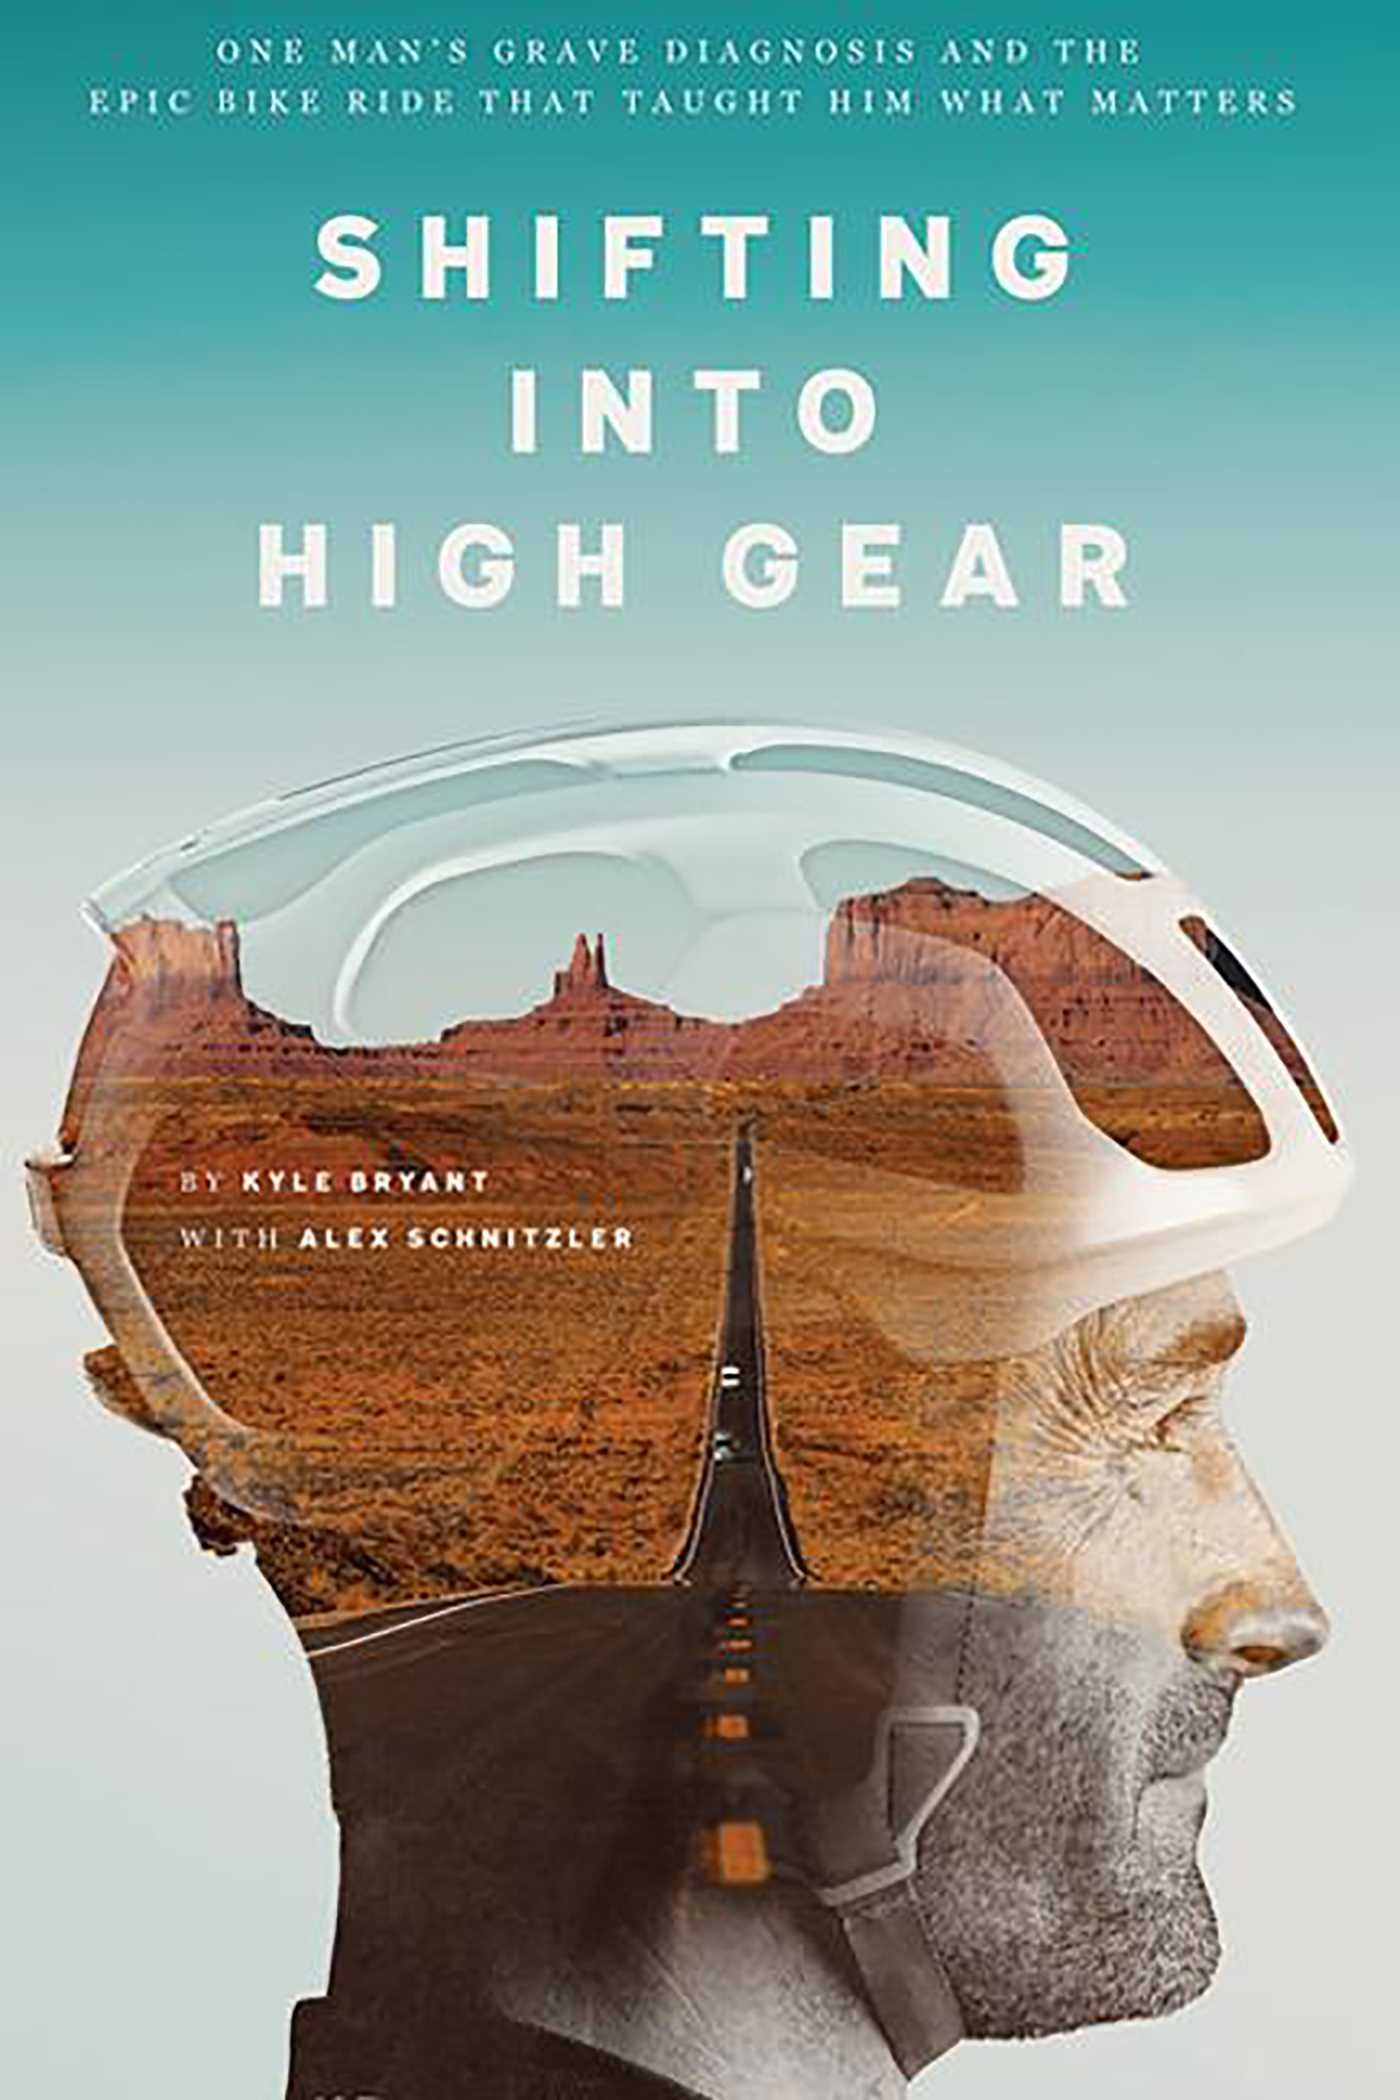 Shifting into High Gear One Mans Grave Diagnosis and the Epic Bike Ride
That Taught Him What Matters Epub-Ebook